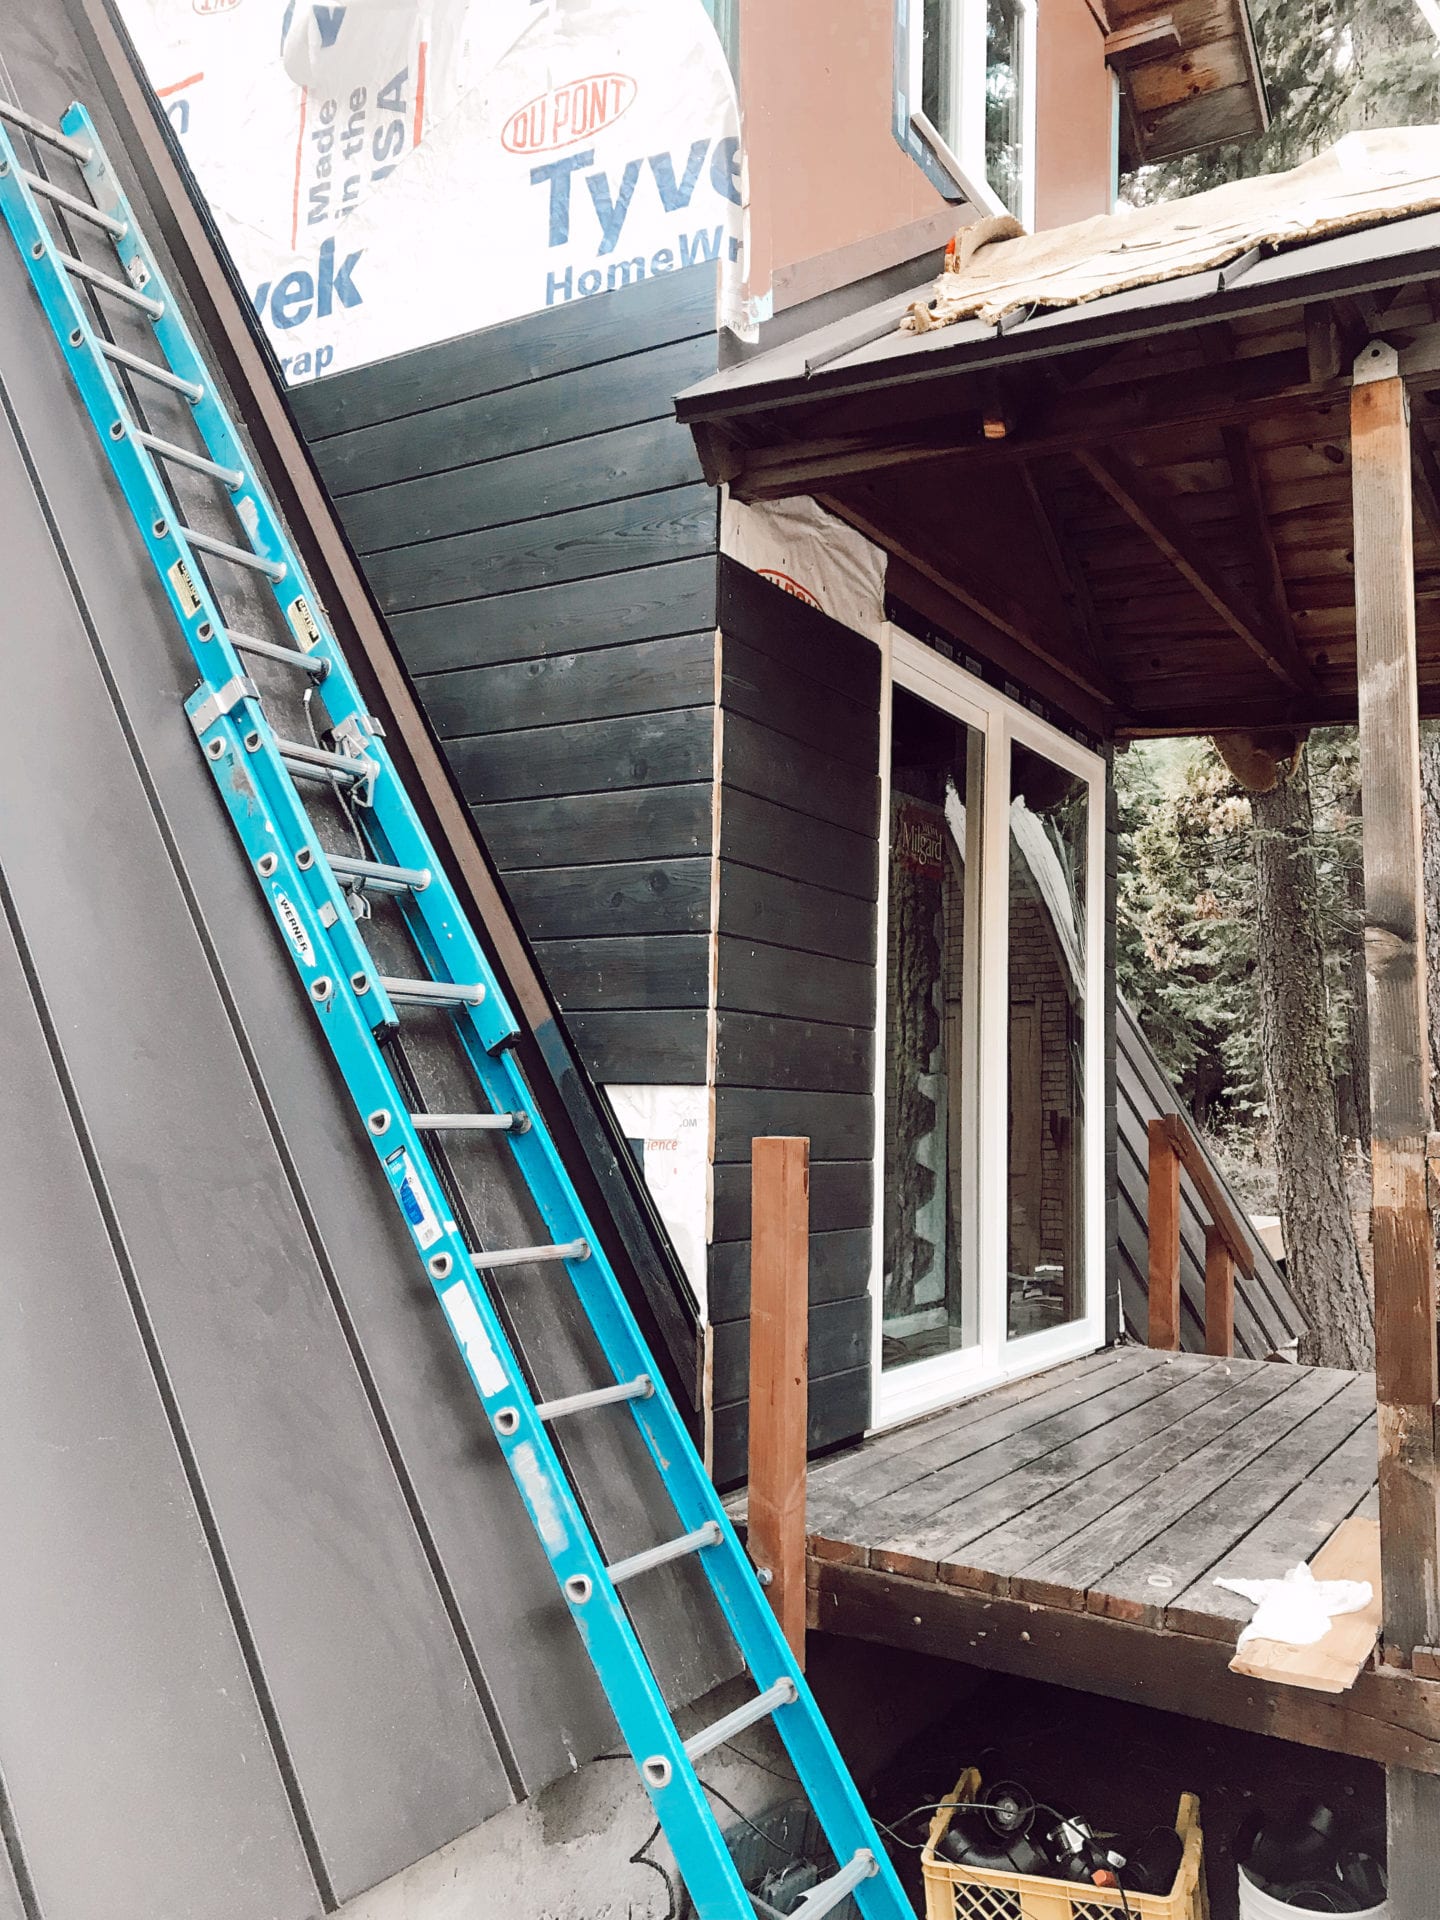 milgard windows | Milgard Windows by popular San Francisco life and style blog, Just Add Glam: image of Milgard Windows being installed in a A-Frame cabin. 